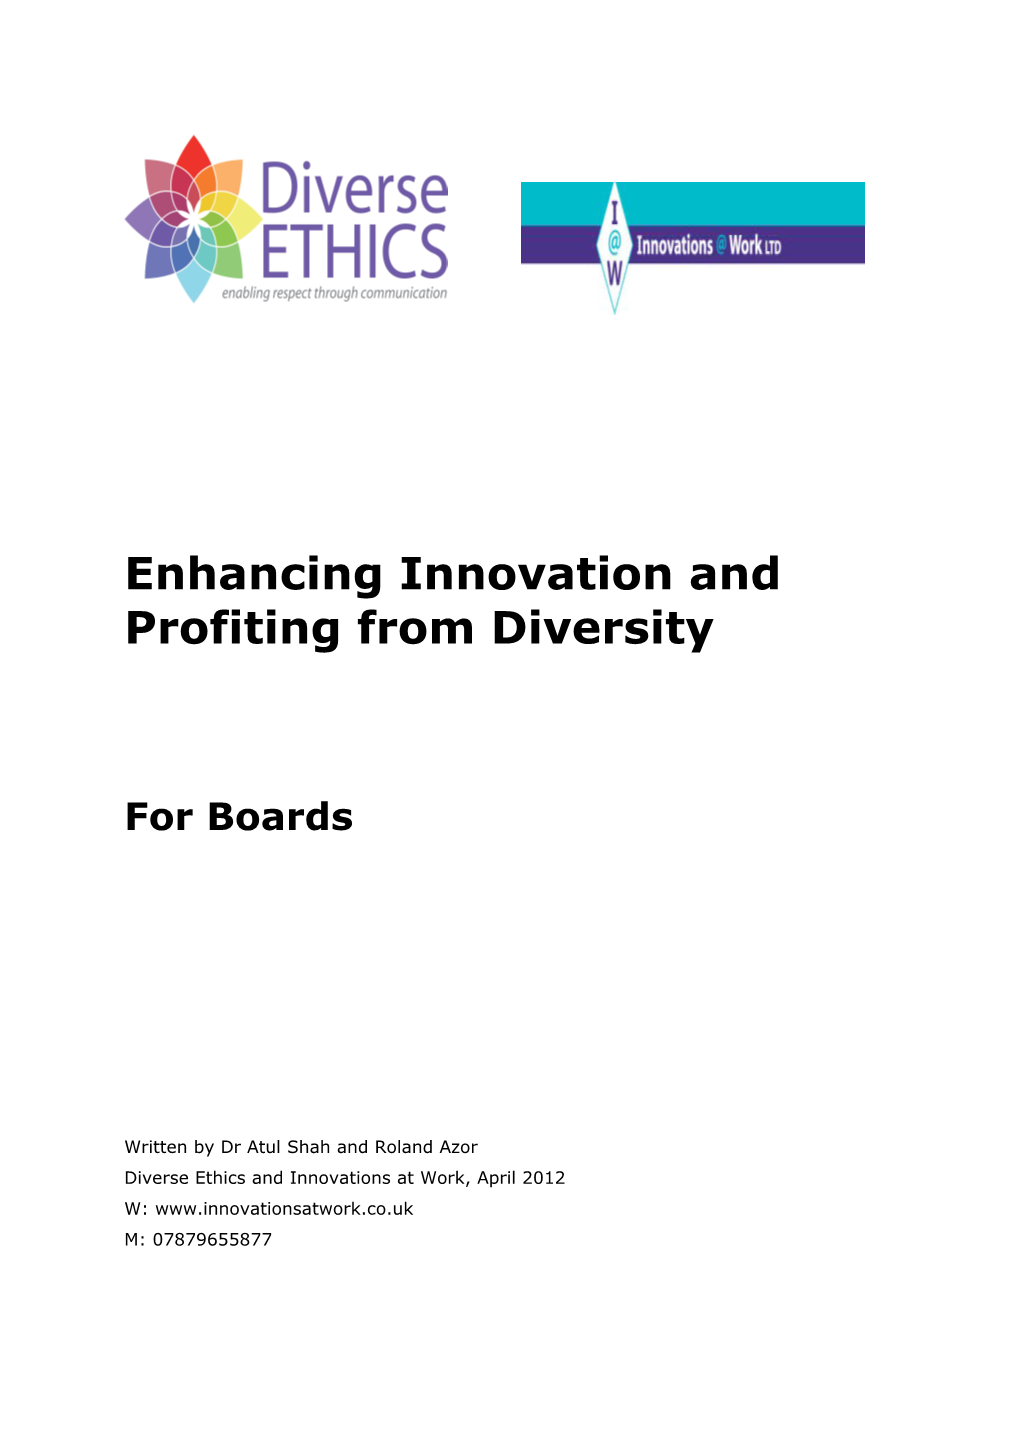 Enhancing Innovation and Profiting from Diversity